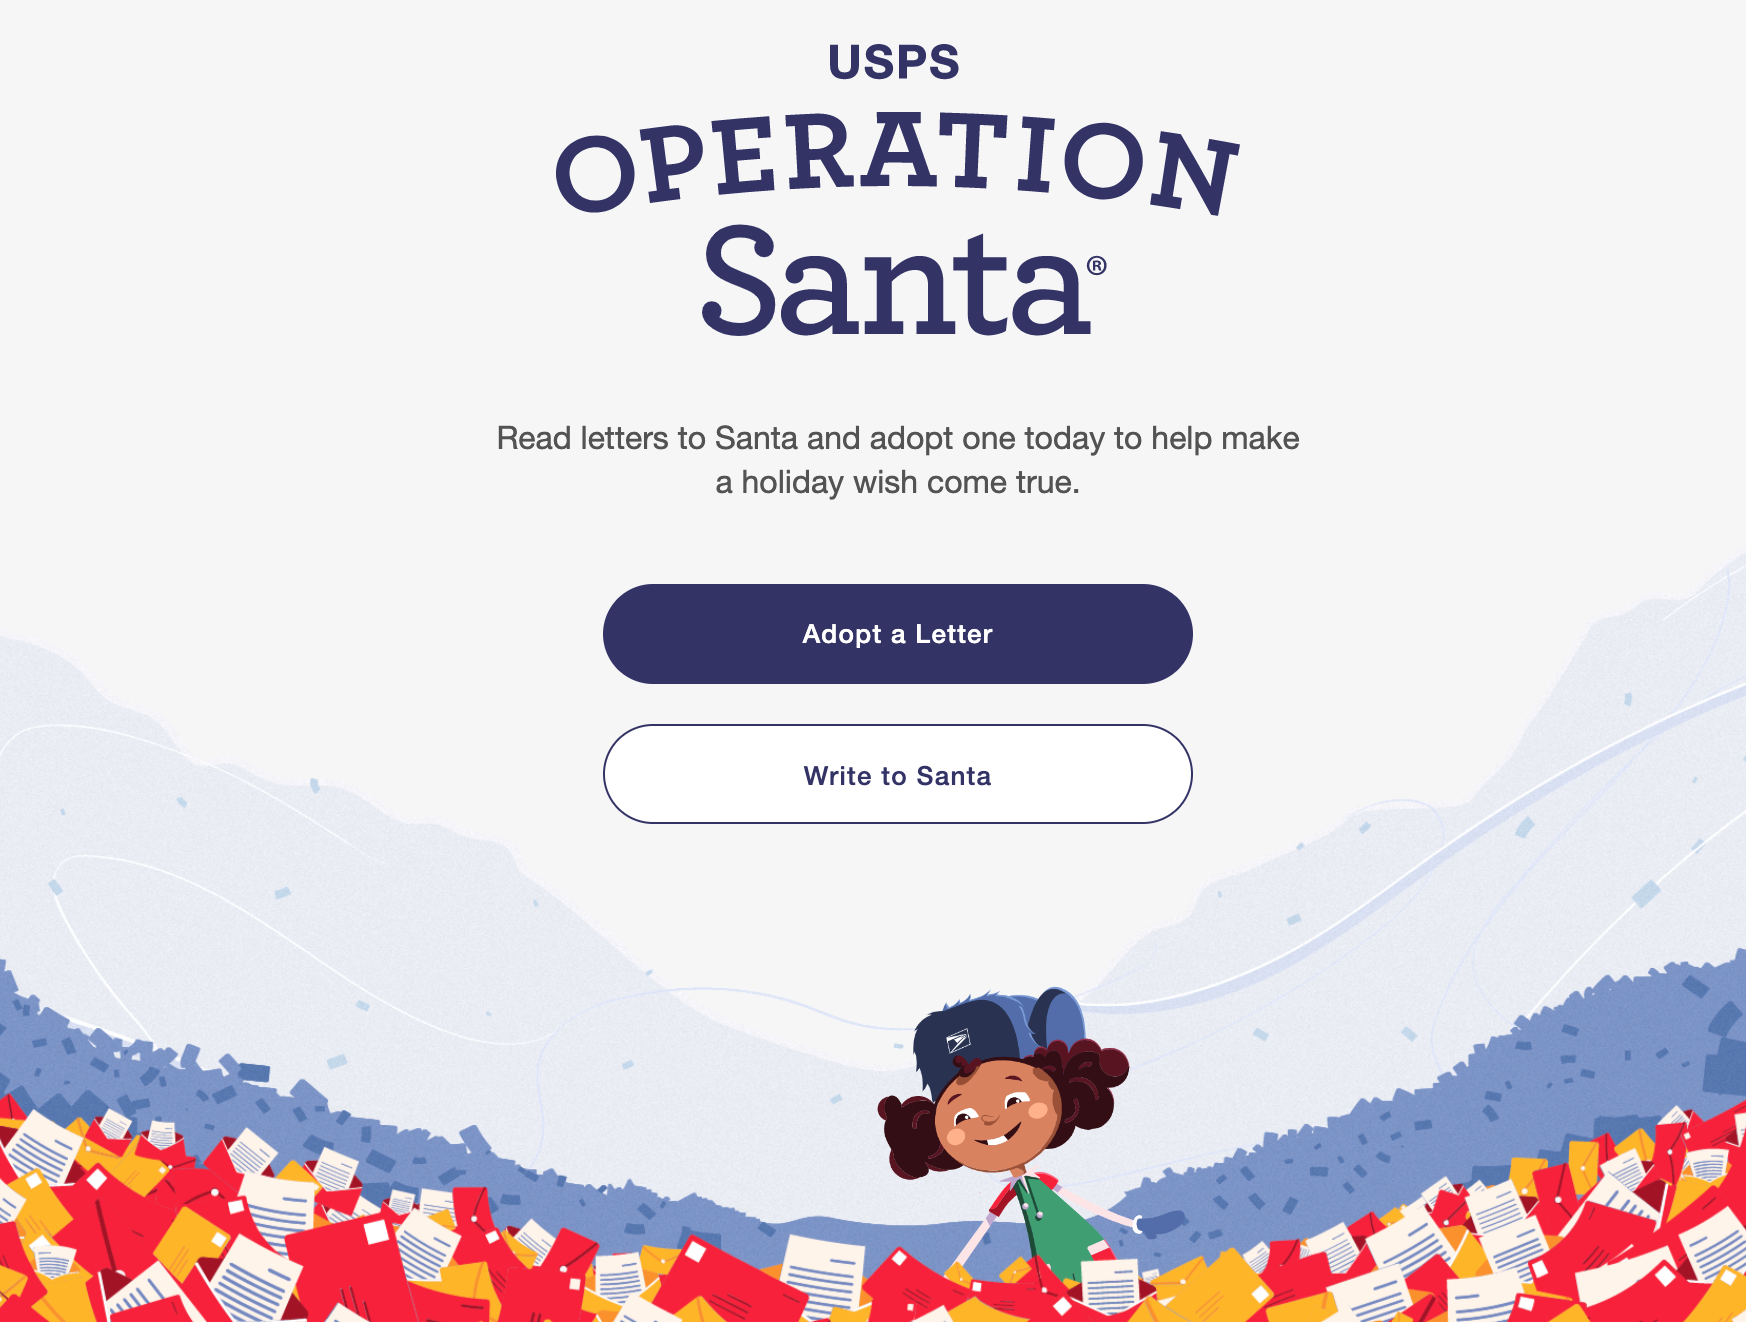 Operation Santa isn’t a heartwarming exercise. It’s America’s cry for